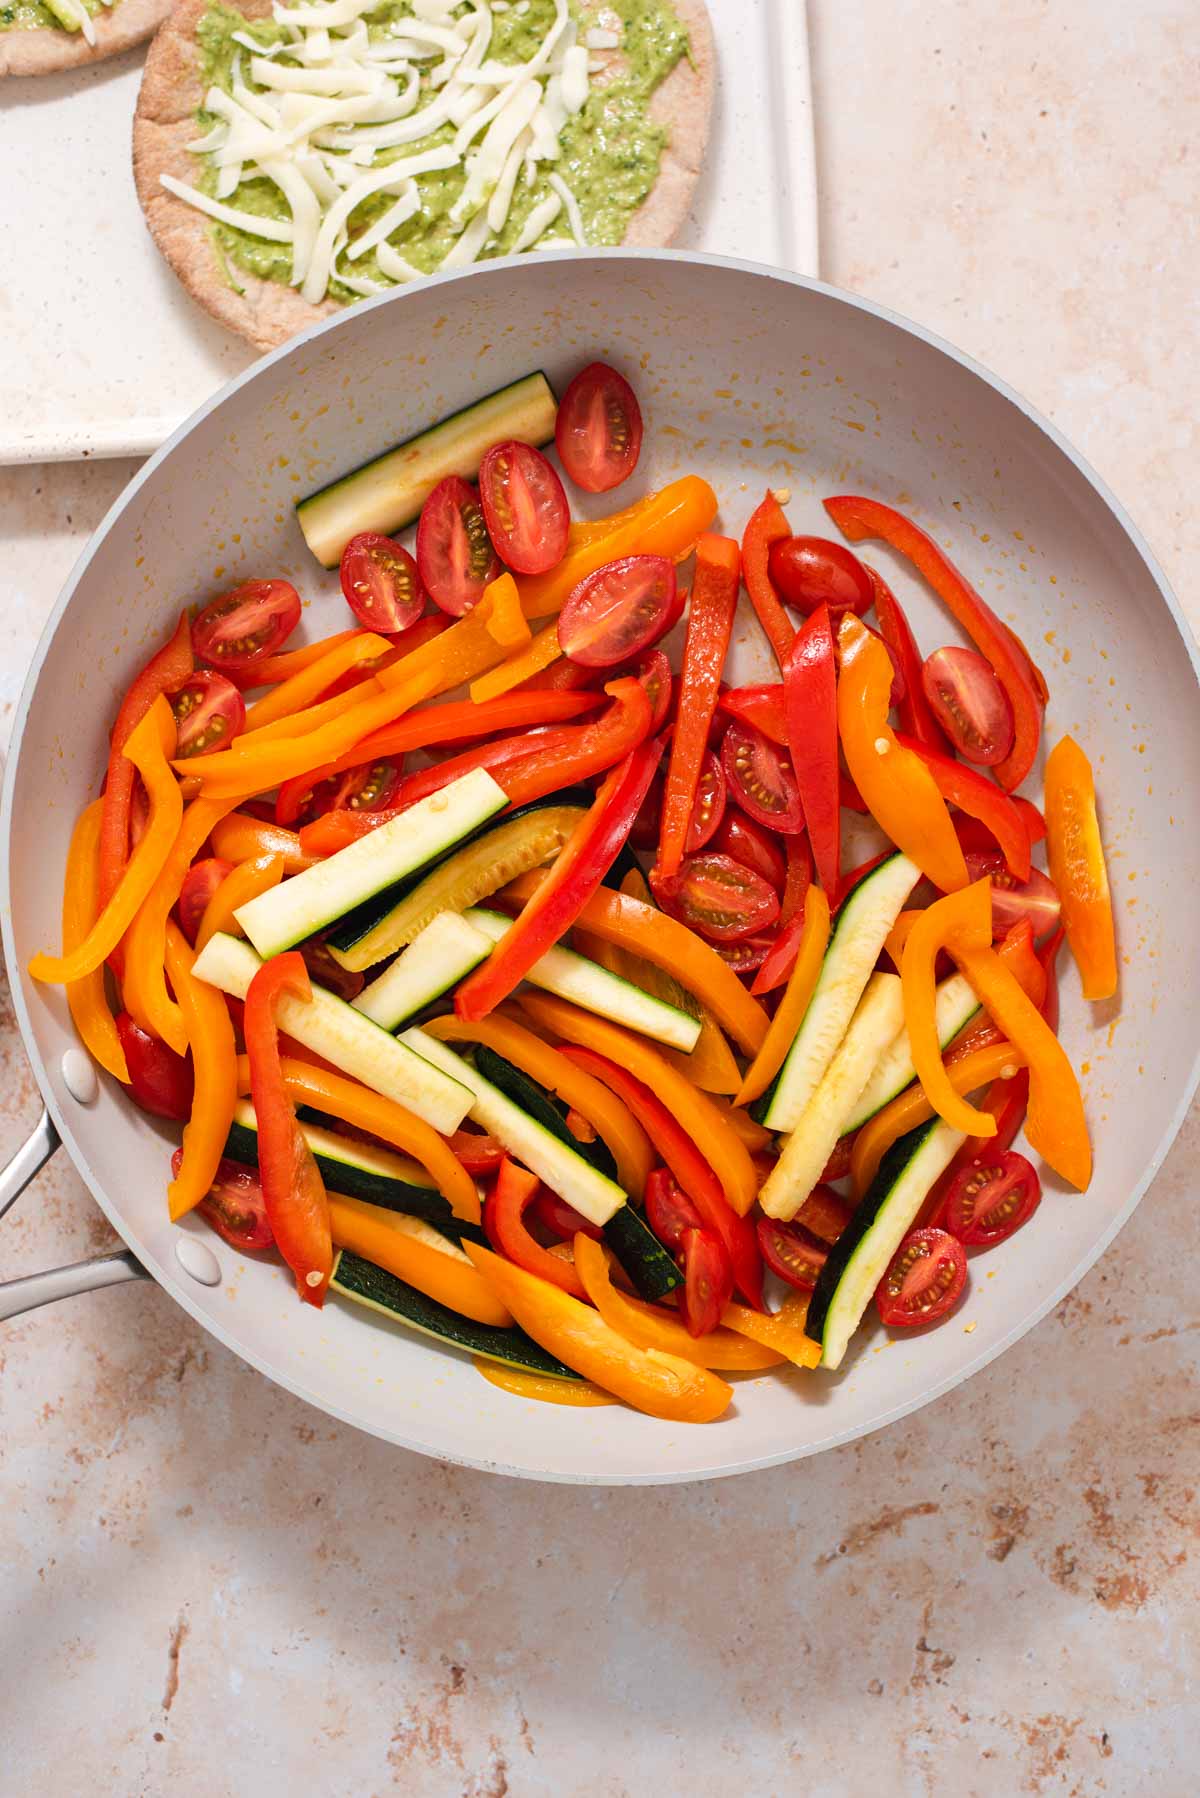 Overhead view of red and orange bell pepper and zucchini in a saute pan